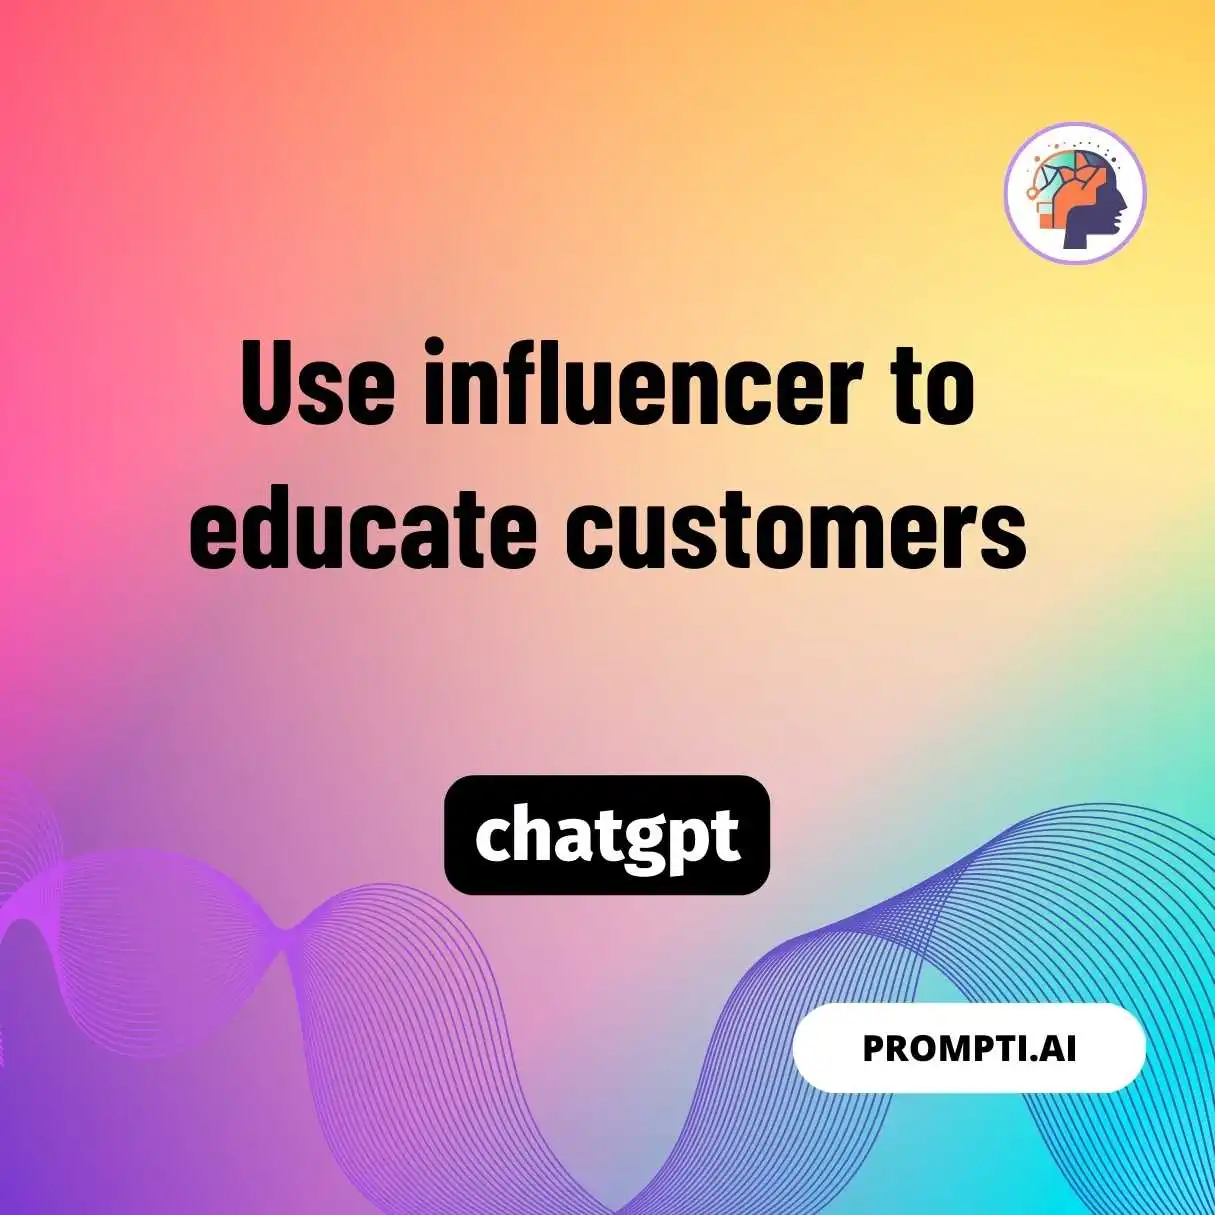 Use influencer to educate customers